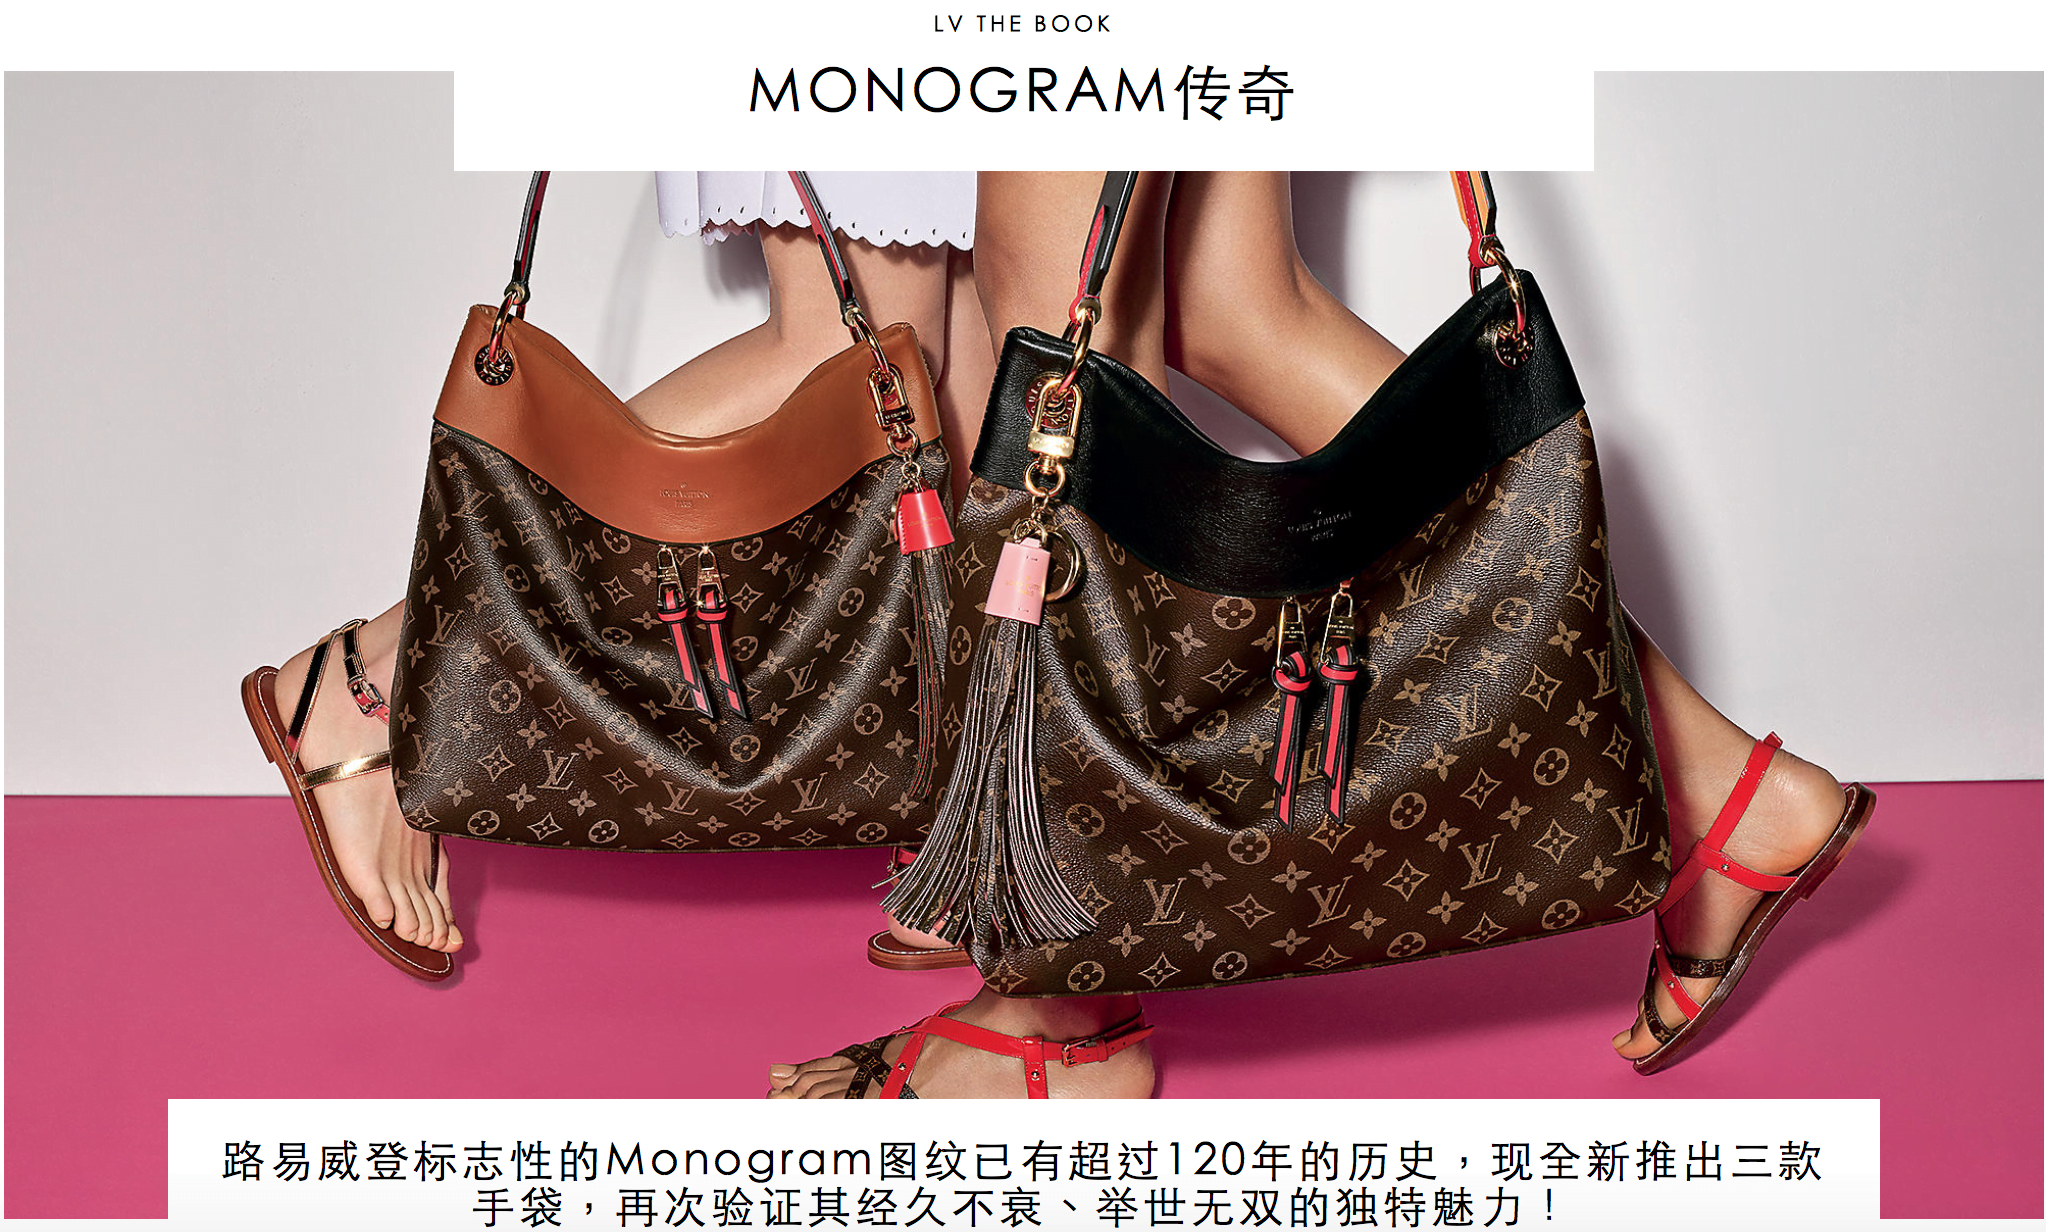 Louis Vuitton Launches Online Sales in China – WWD